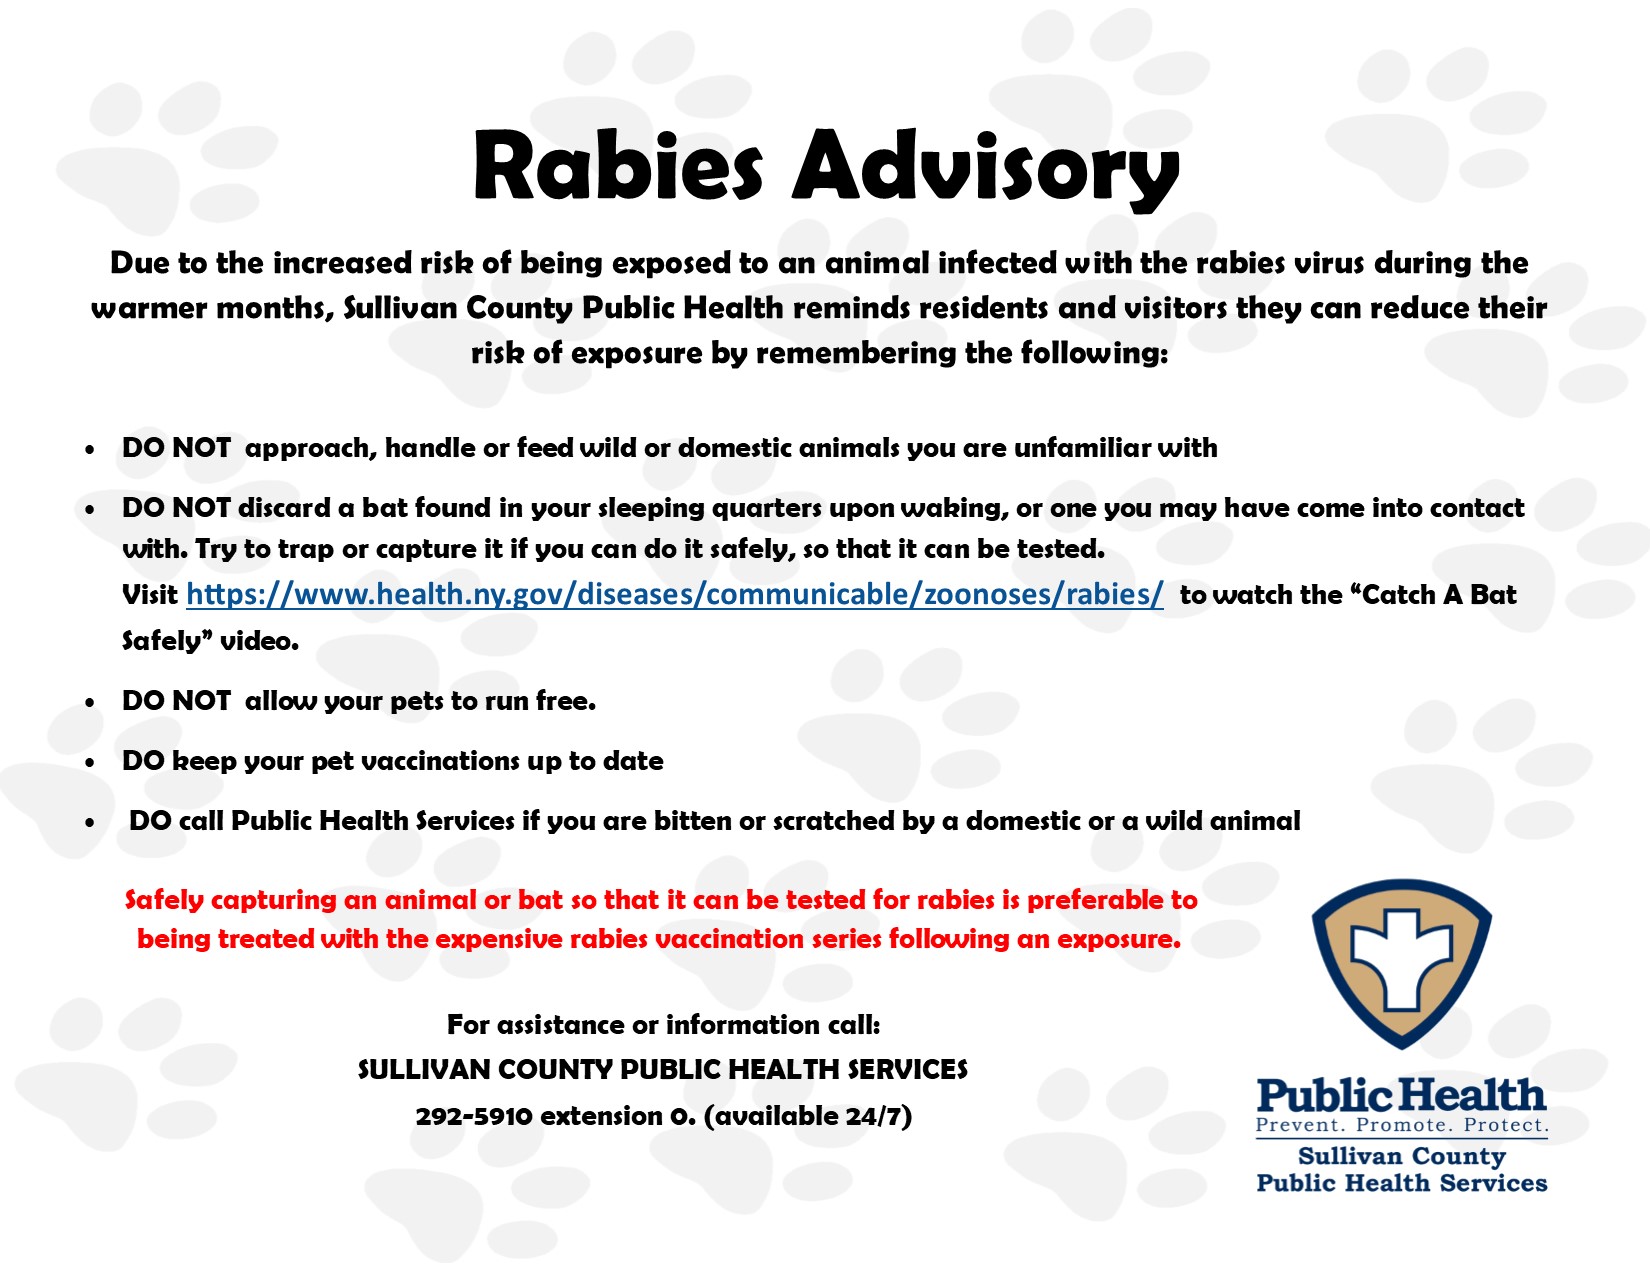 Rabies Advisory and Prevention